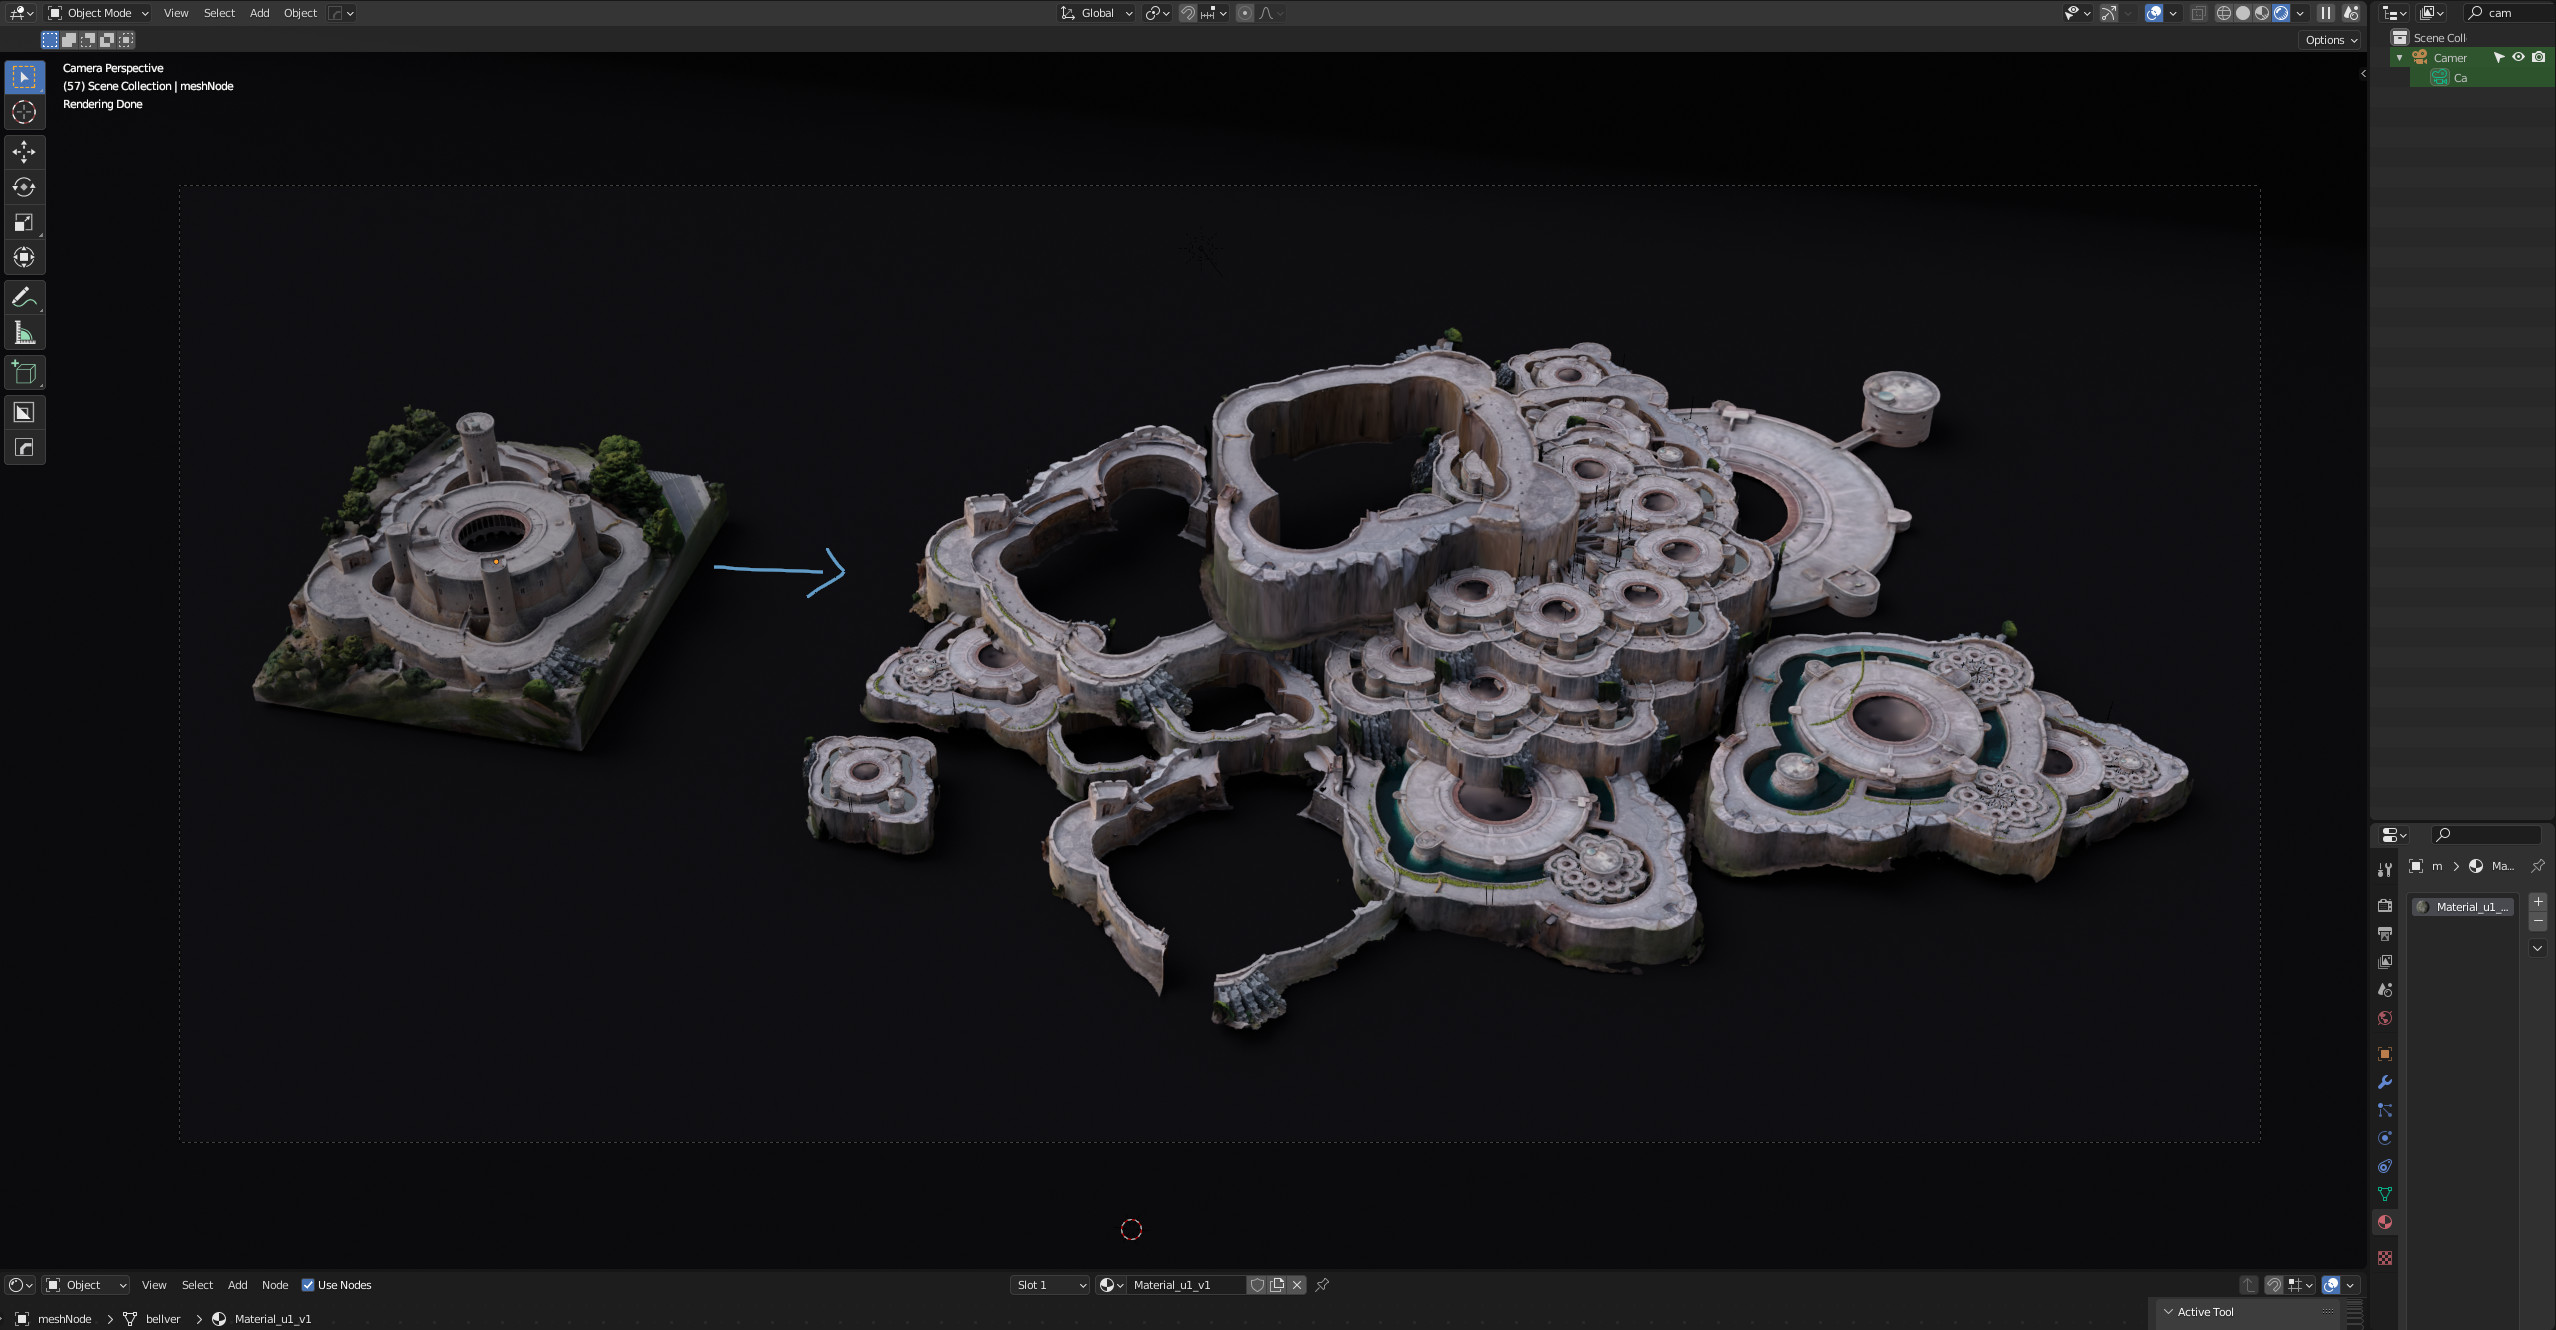 a lot of the stuff was made out of single asset https://sketchfab.com/3d-models/bellver-castle-70ef075a31ef44ac97bc1459baee7a18